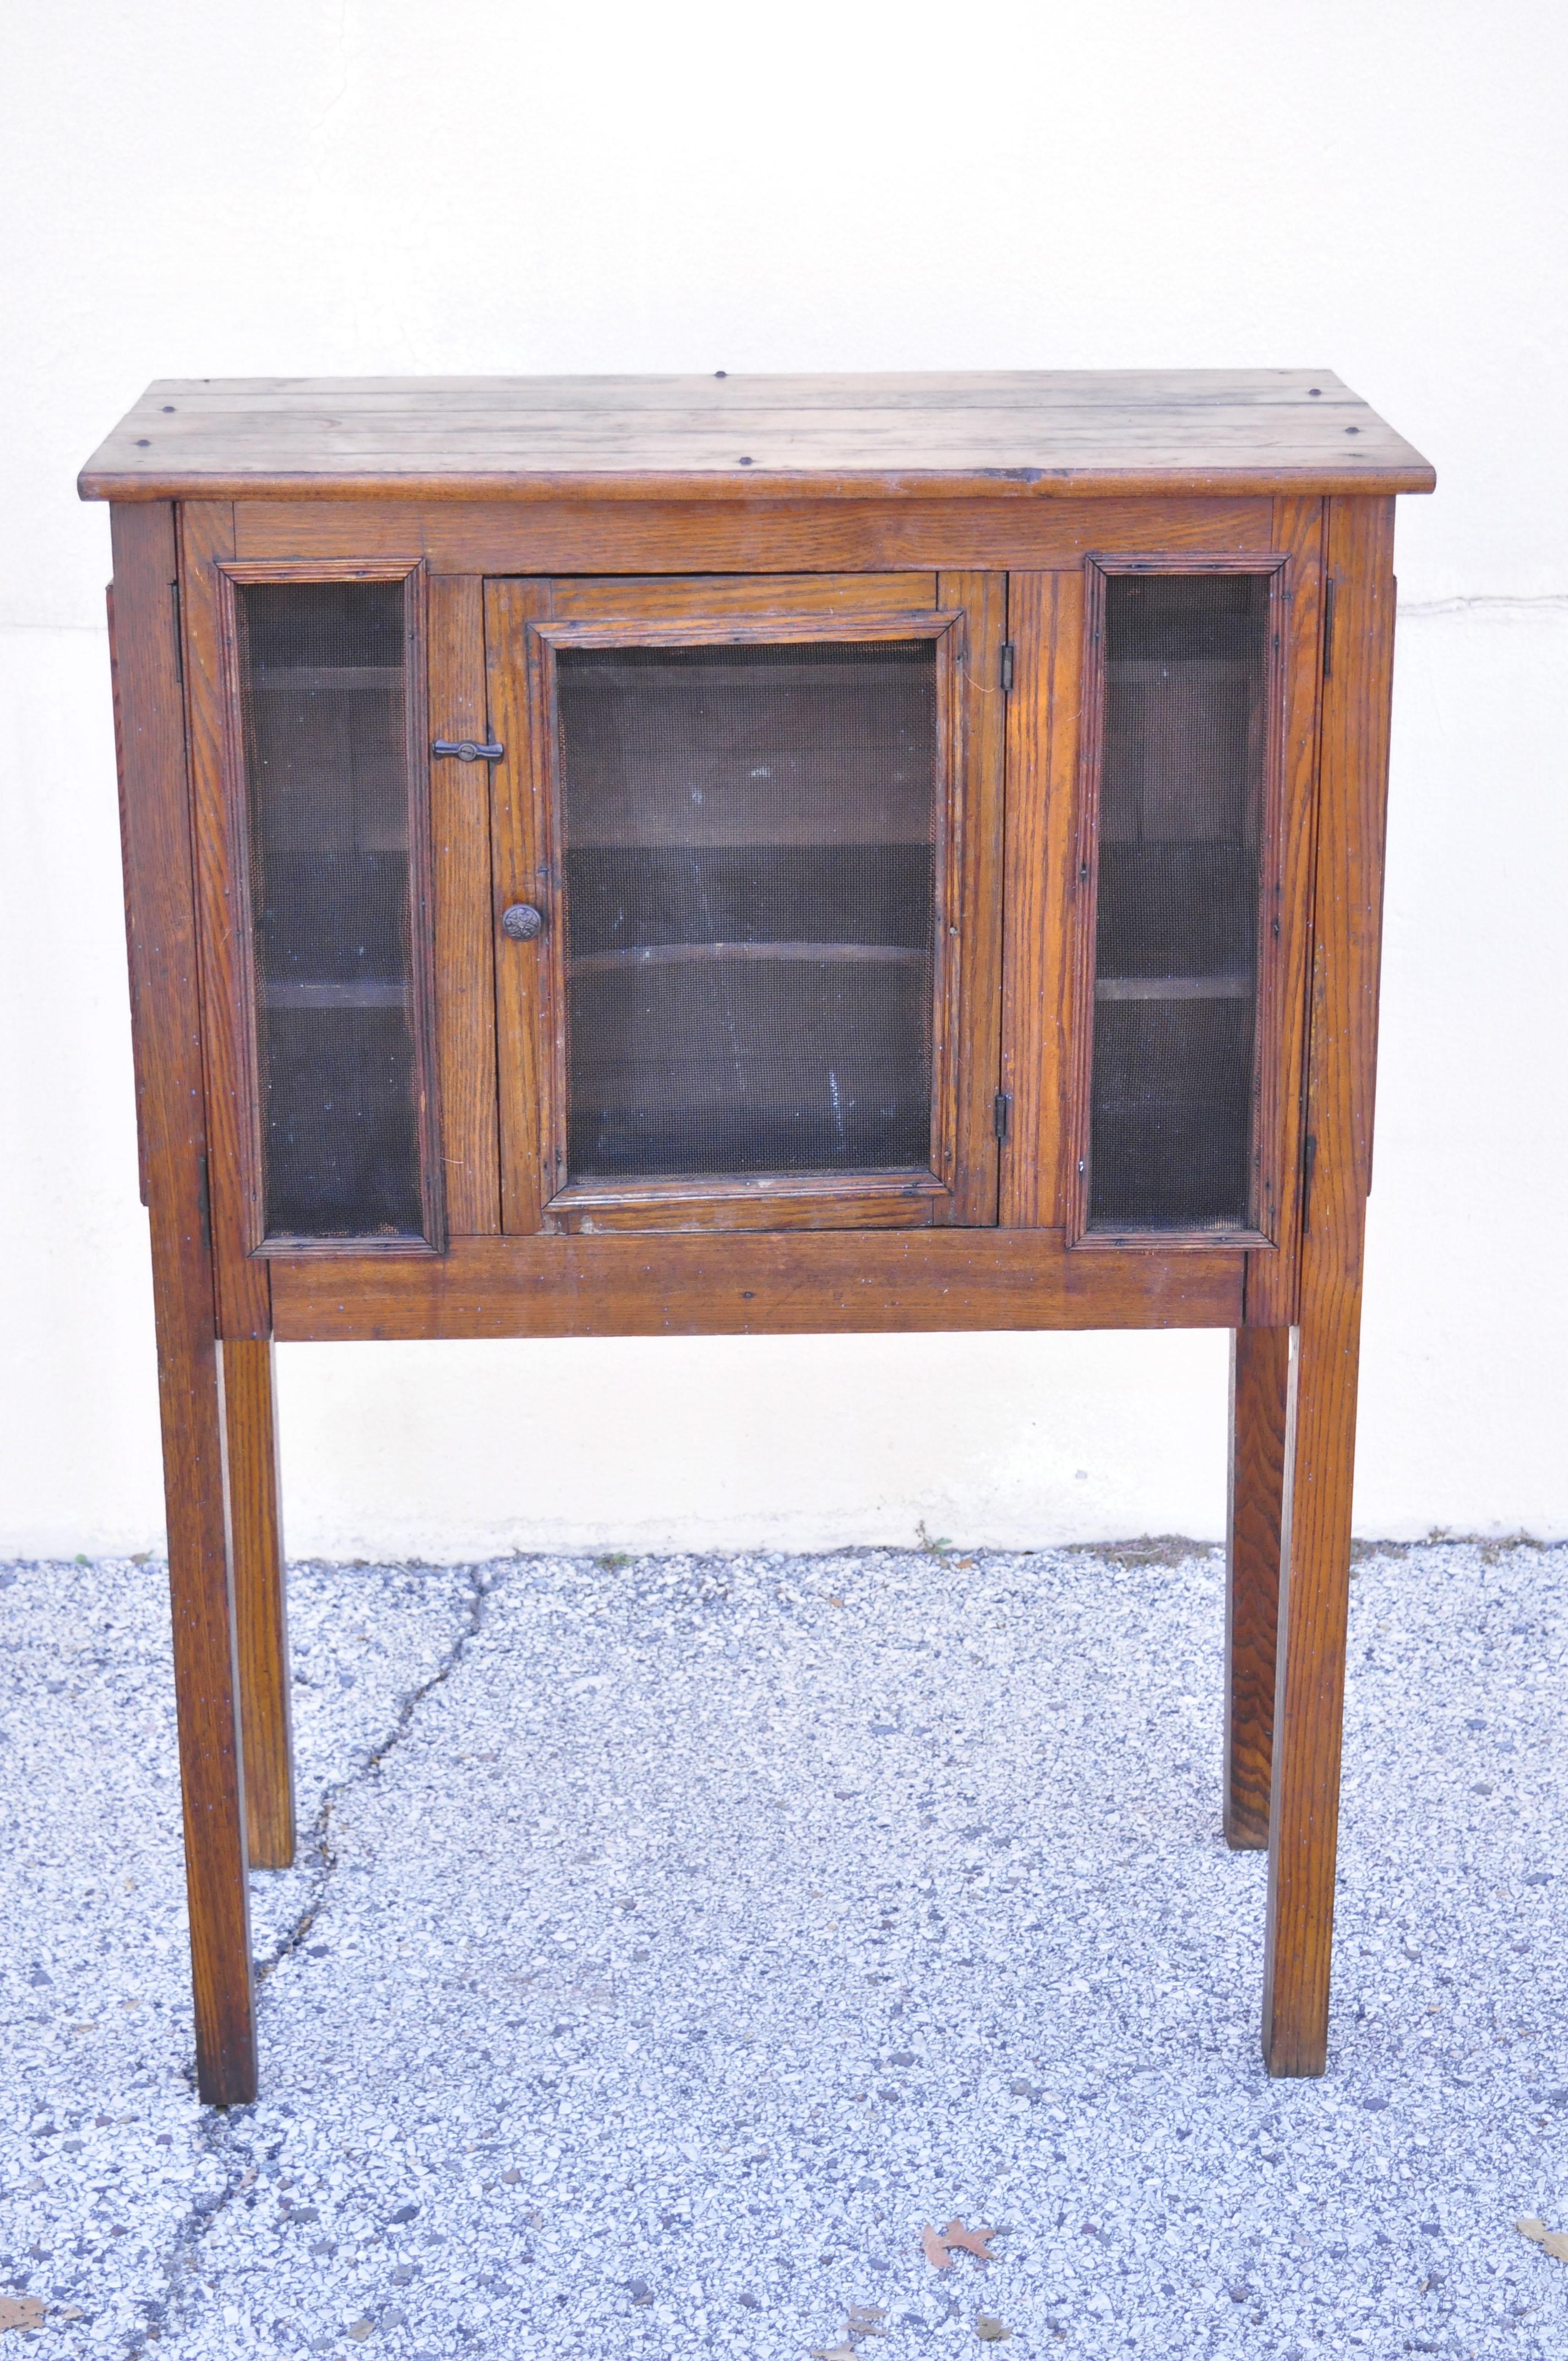 Antique Arts & Crafts Mission oak wood pie safe kitchen cupboard cabinet on legs. Item features metal mesh panels, solid wood construction, beautiful wood grain, distressed finish, 1 swing doors, wooden shelves, very nice antique item, quality